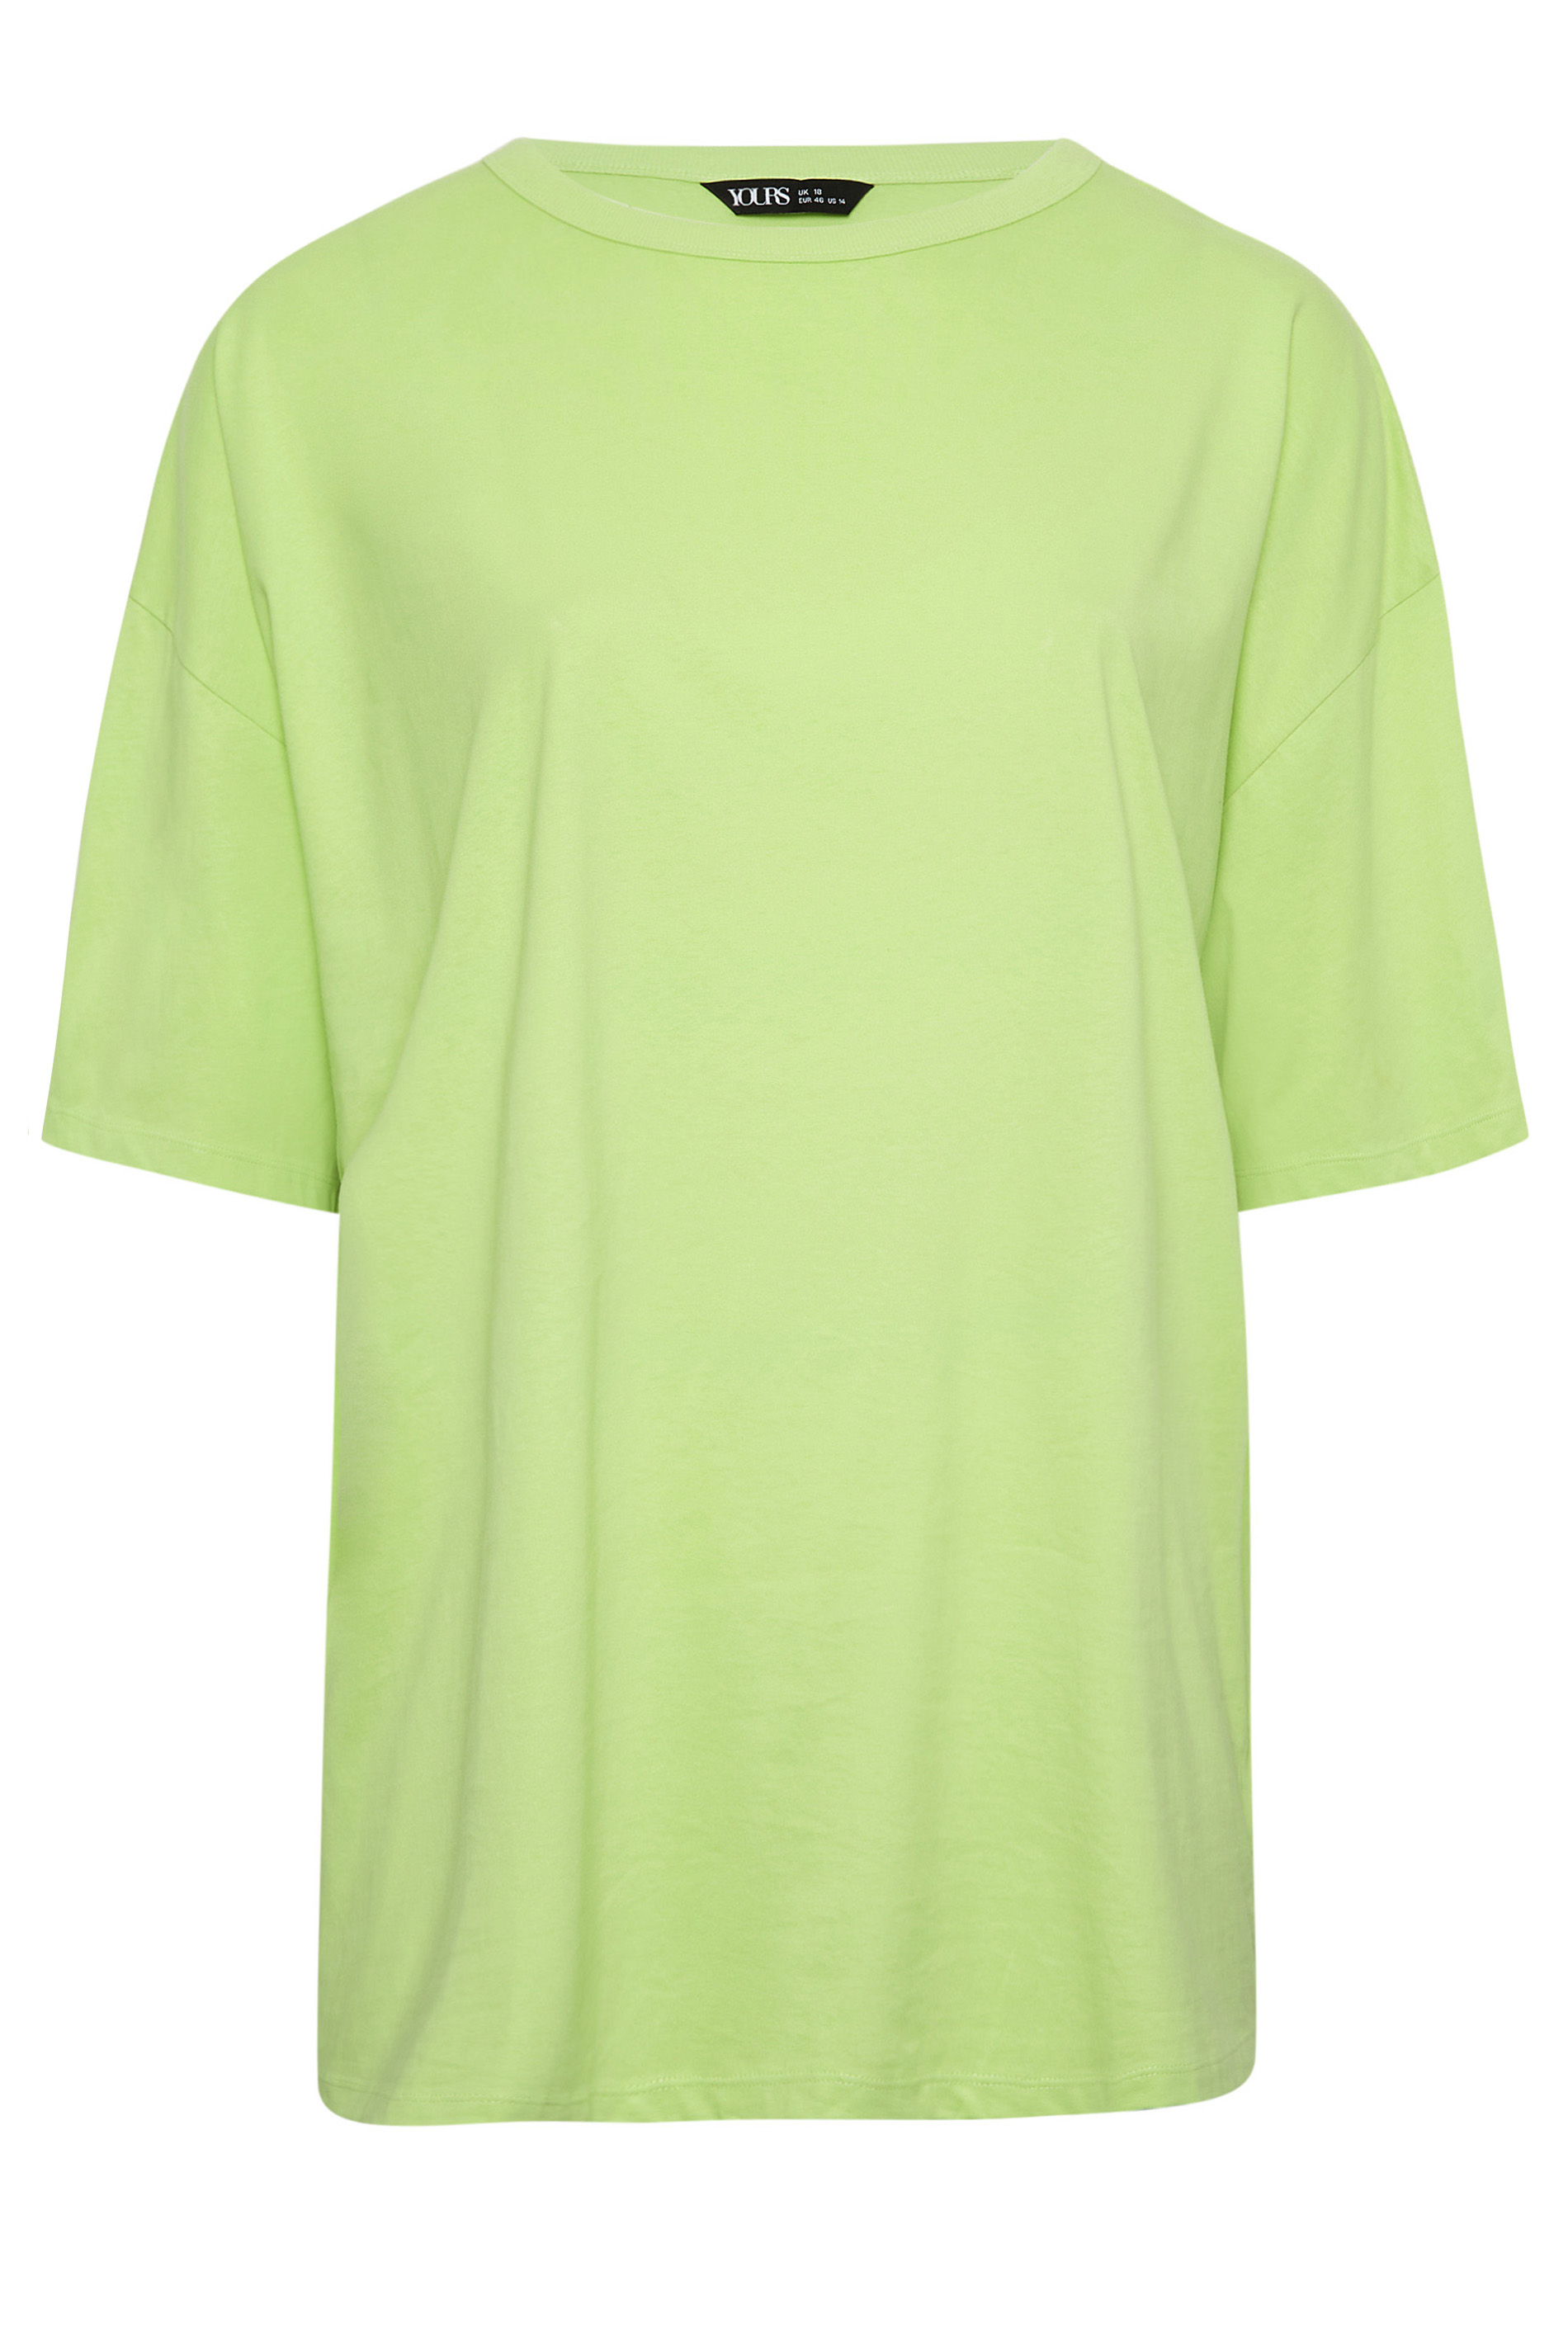 Holde Slette donor YOURS Plus Size Lime Green Oversized Boxy T-Shirt | Yours Clothing